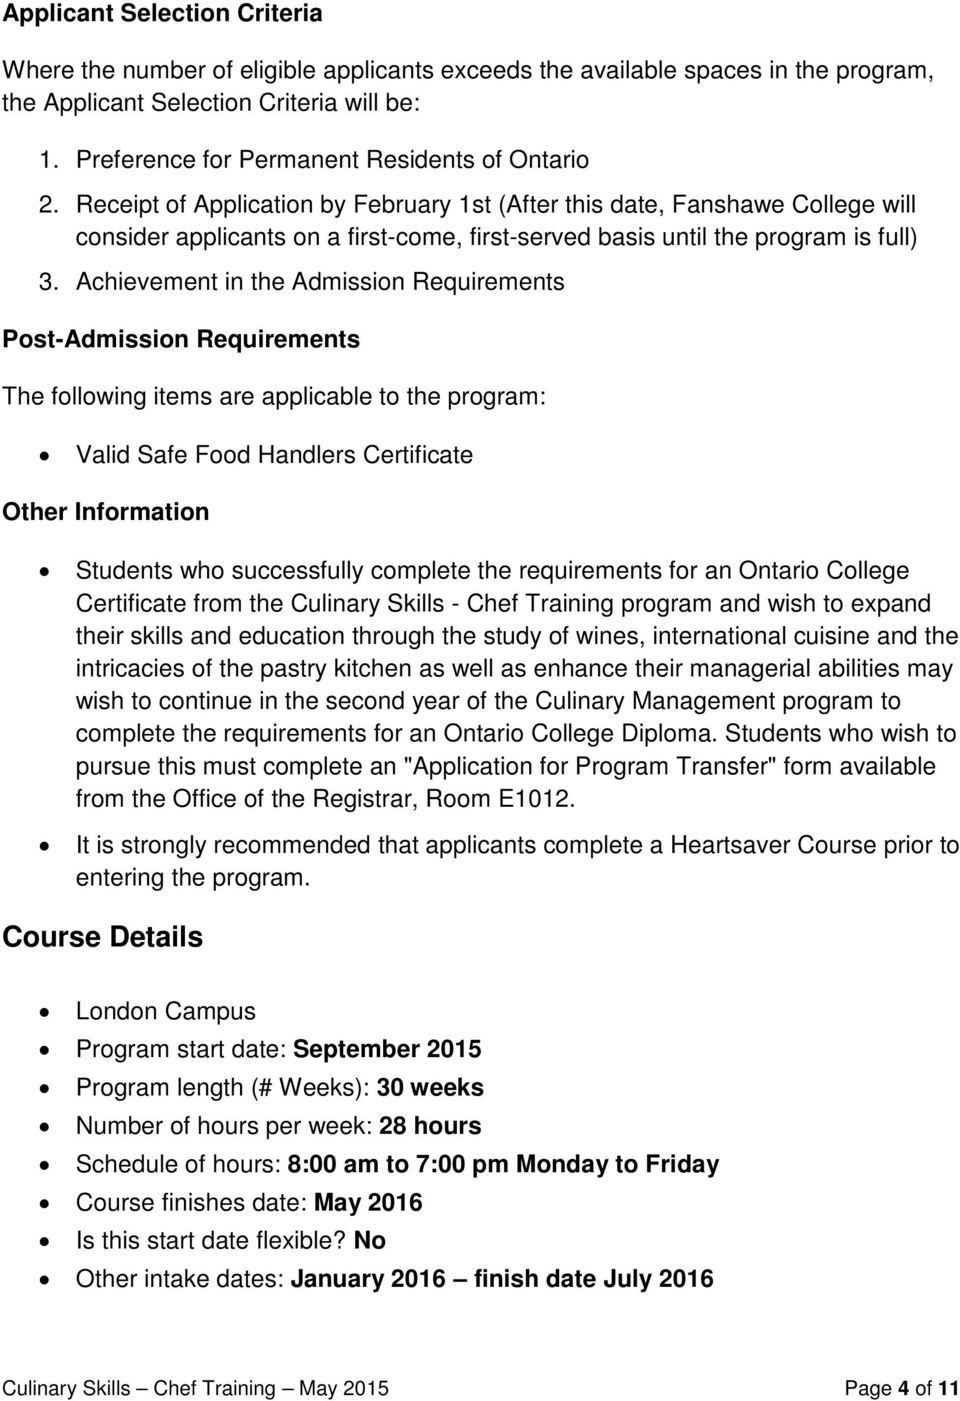 Receipt of Application by February 1st (After this date, Fanshawe College will consider applicants on a first-come, first-served basis until the program is full) 3.